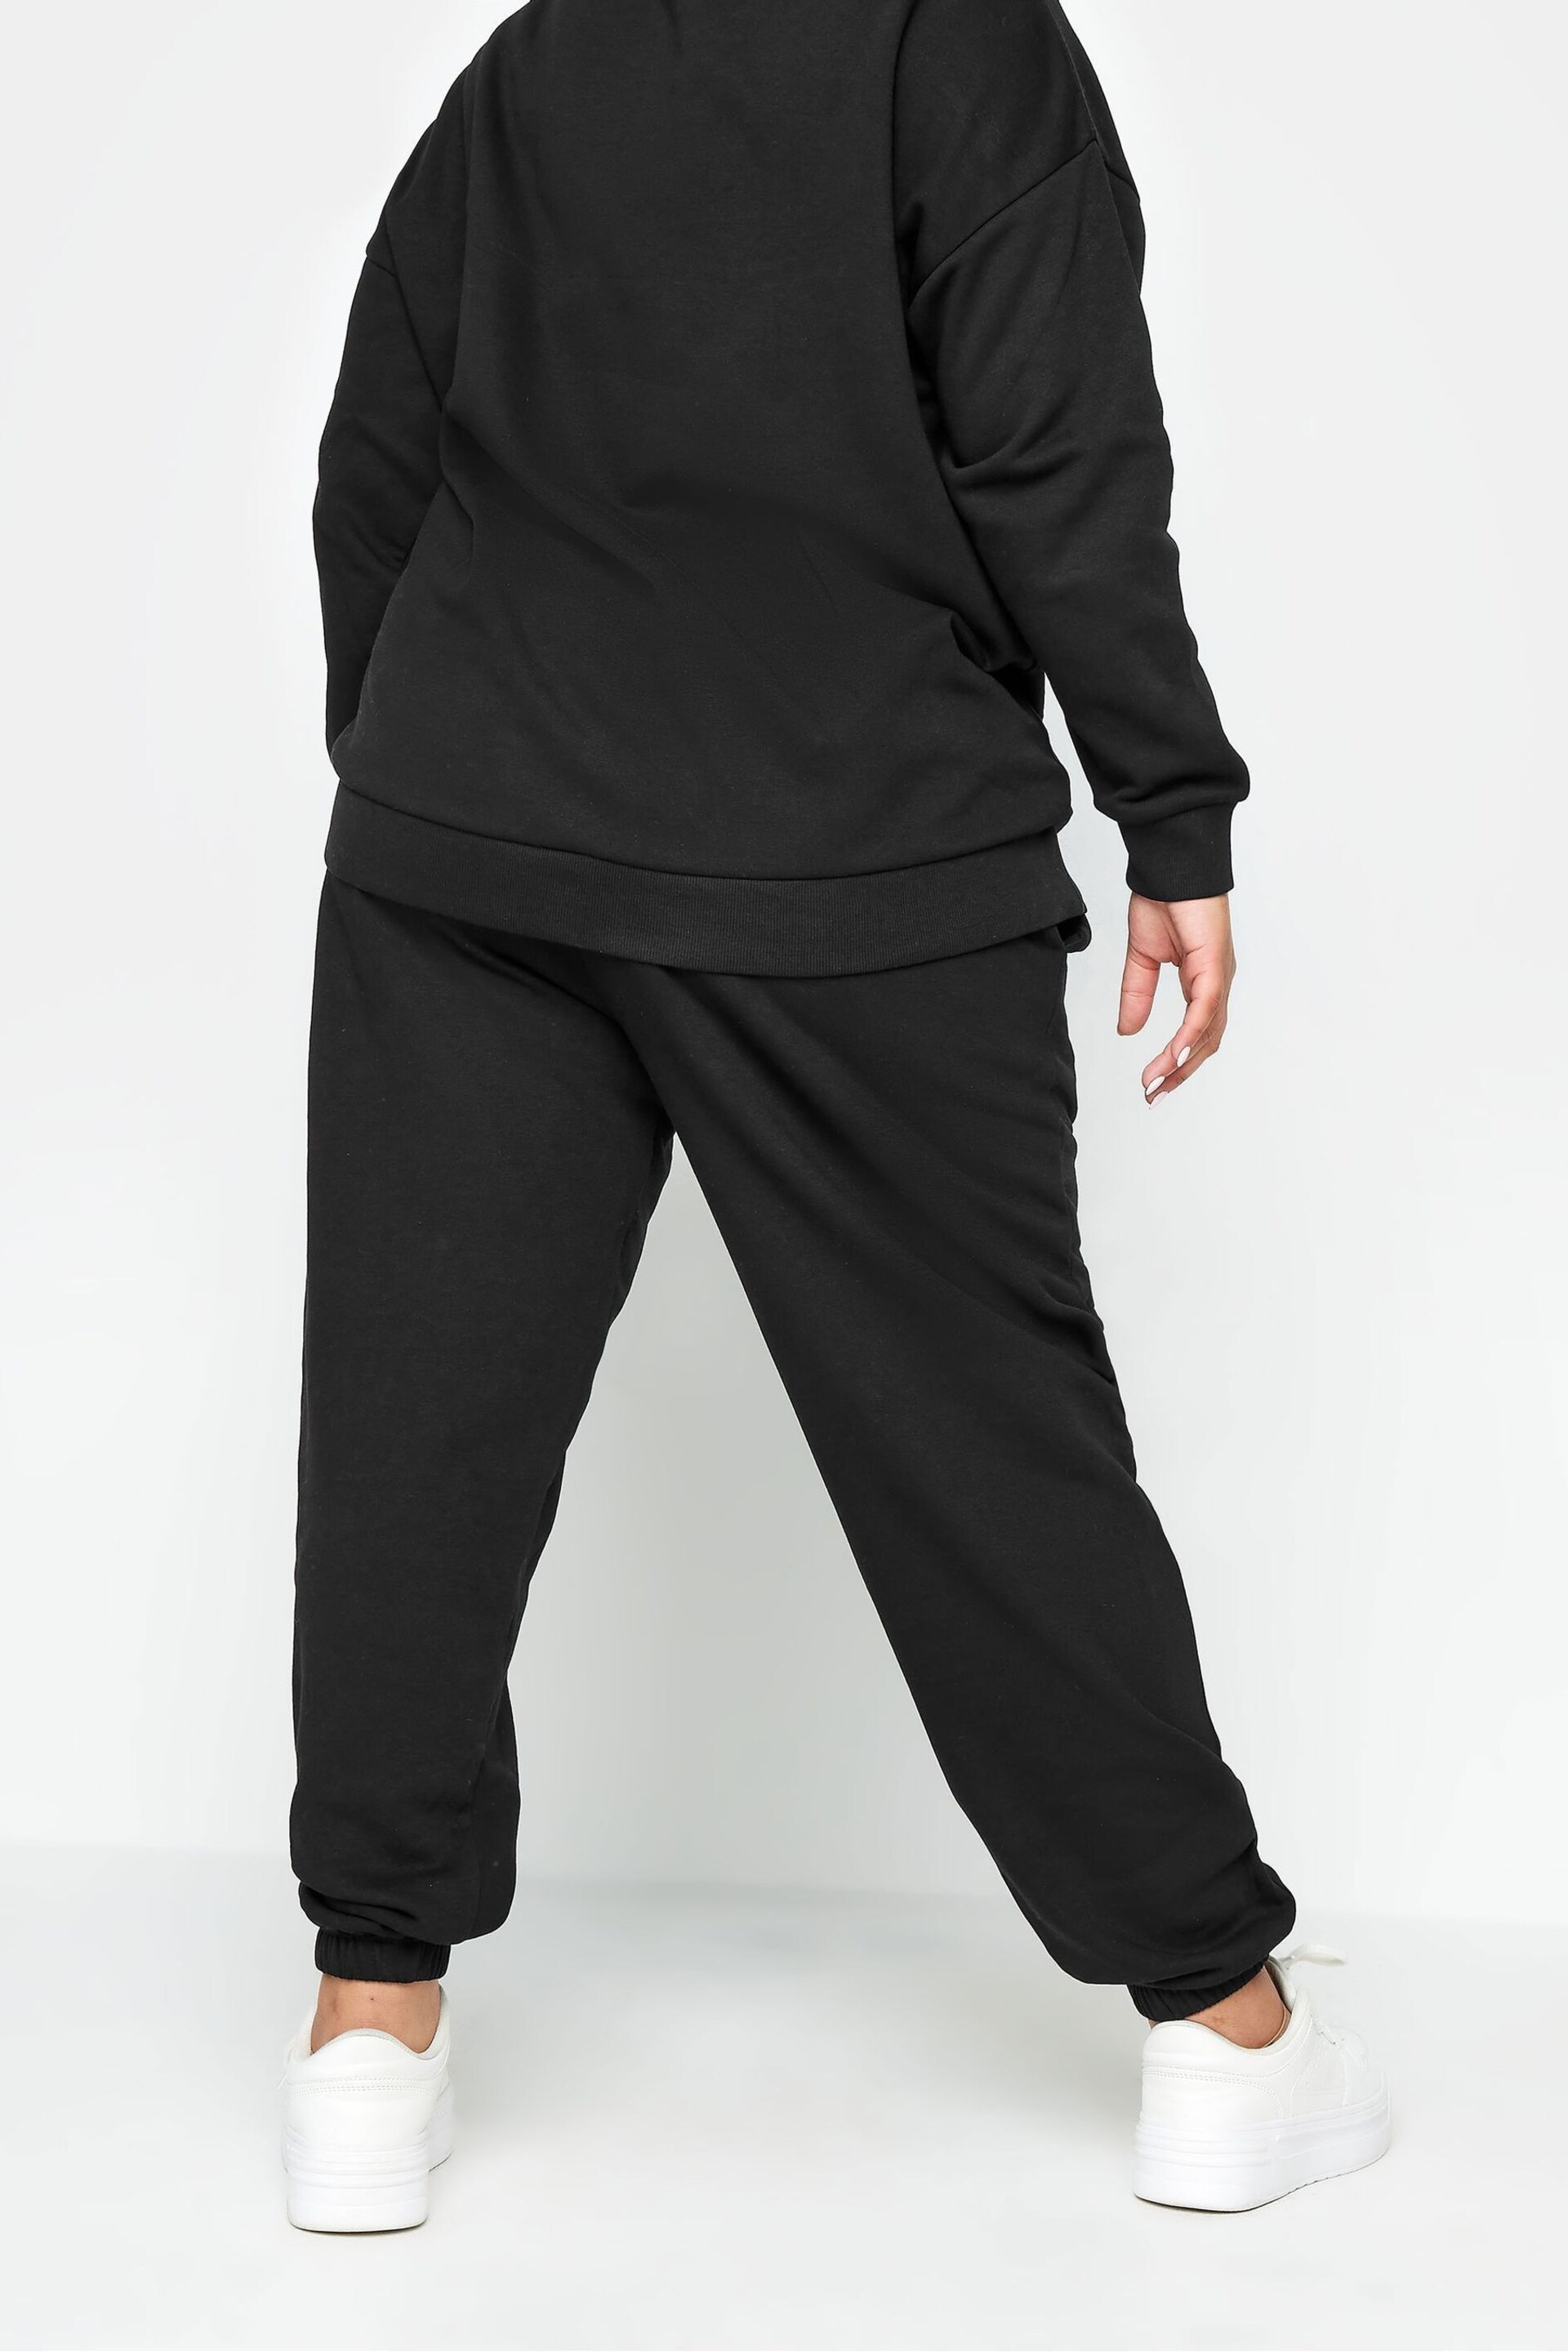 Yours Curve Black Joggers - Image 3 of 4